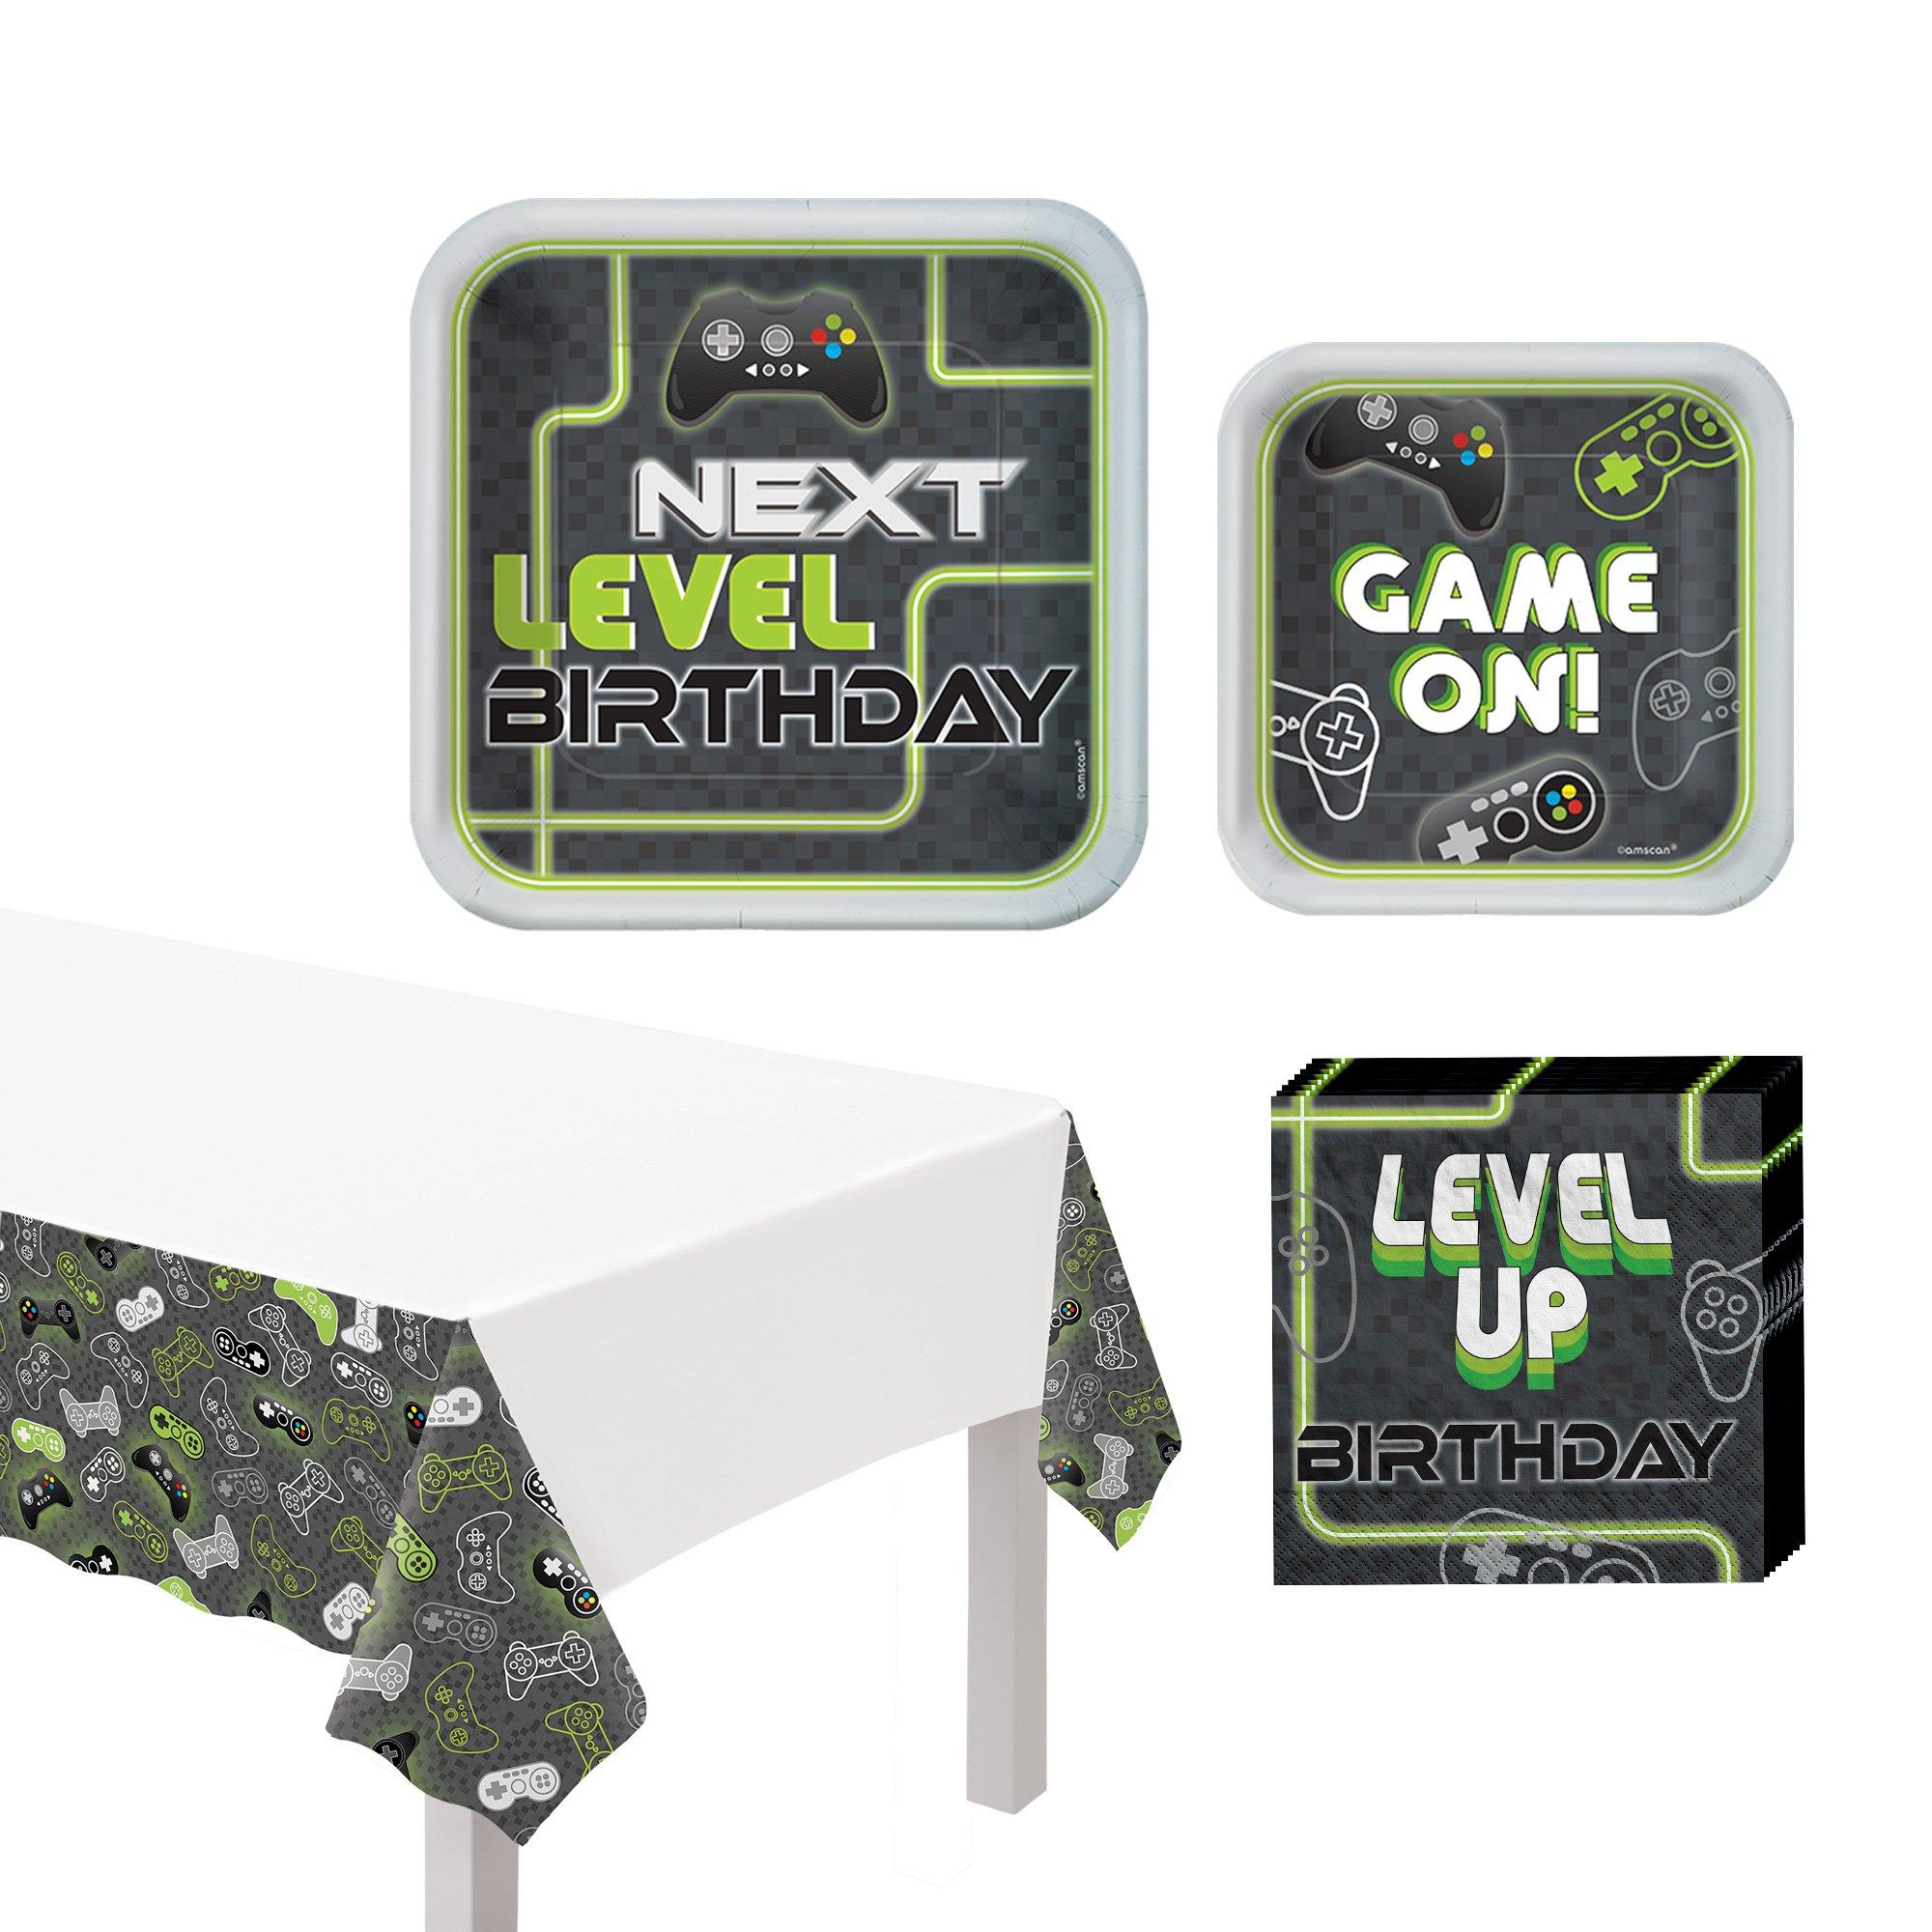 Level Up Party Supplies Pack for 8 Guests - Kit Includes Plates, Napkins & Table Cover